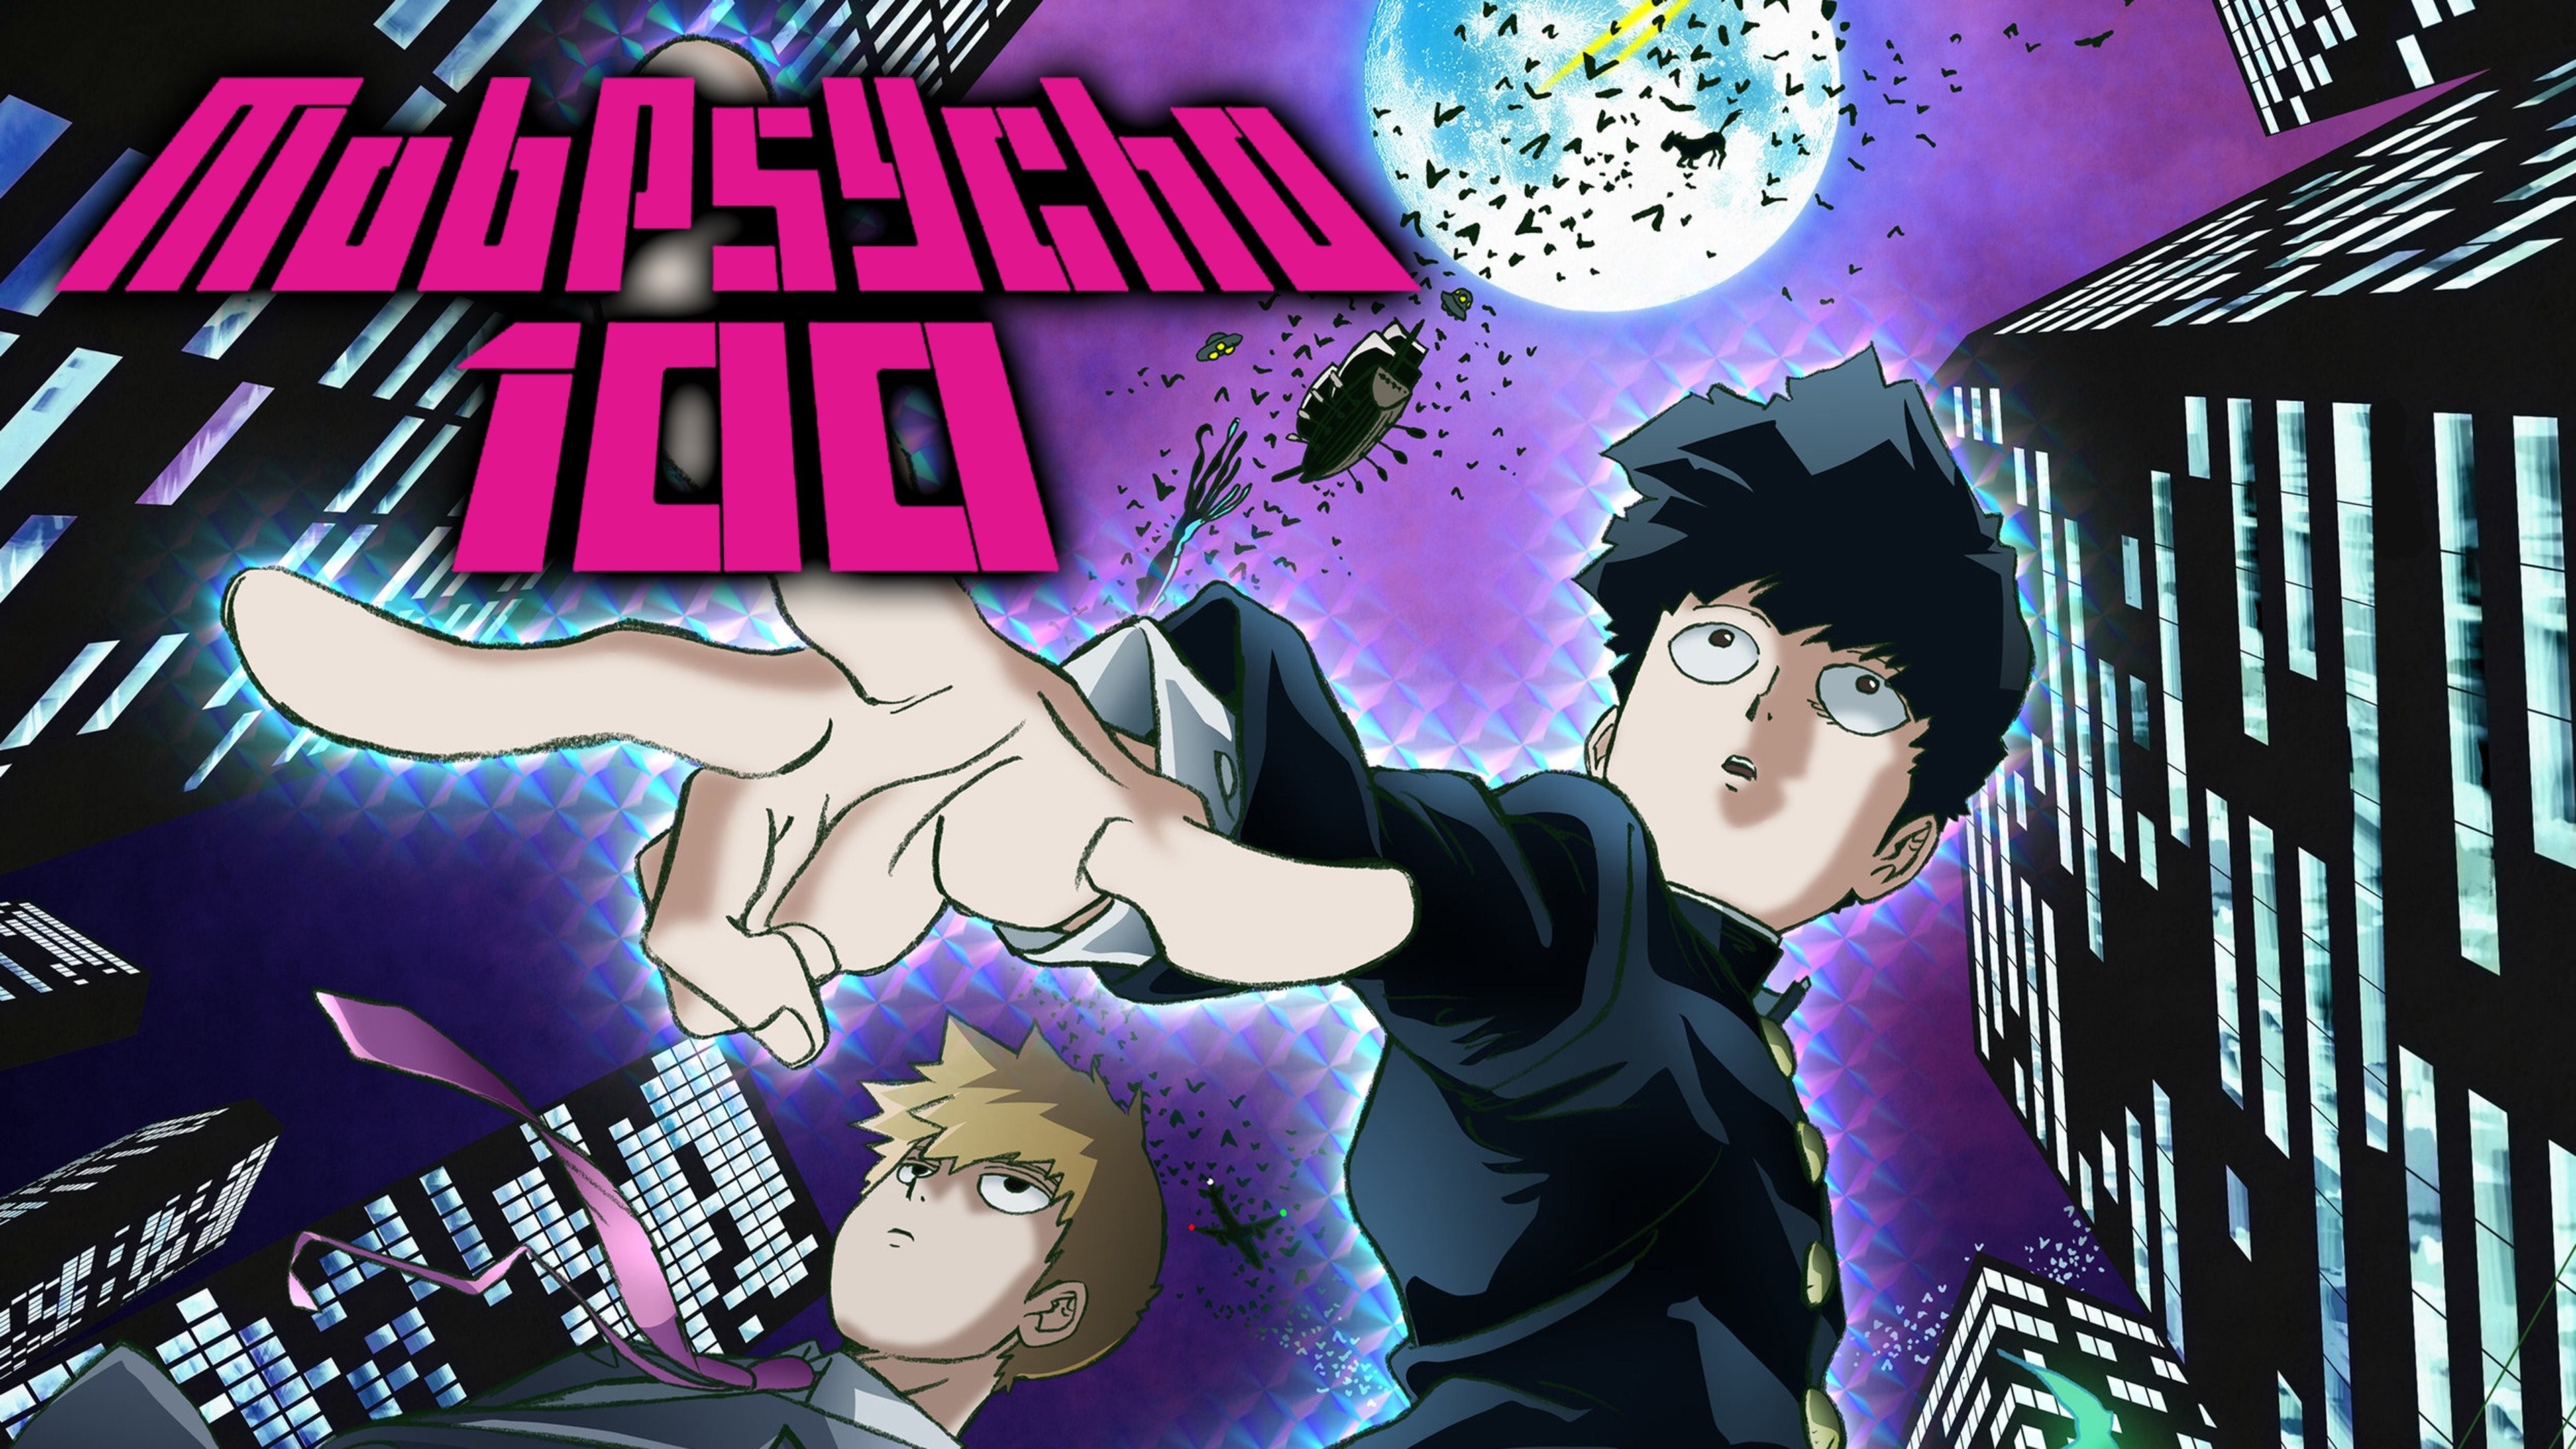 𝖊𝖗𝖗𝖆𝖉𝖆𝖞  𝘤𝘰𝘮𝘮𝘴 𝘰𝘯 𝘩𝘰𝘭𝘥 on X: With the announcement of Mob  Psycho 100 season 3 i'll bring back this illustration i did a few years  ago. #mobpsycho100 #mp100 #mobpsycho100season3 #mobpsycho   /